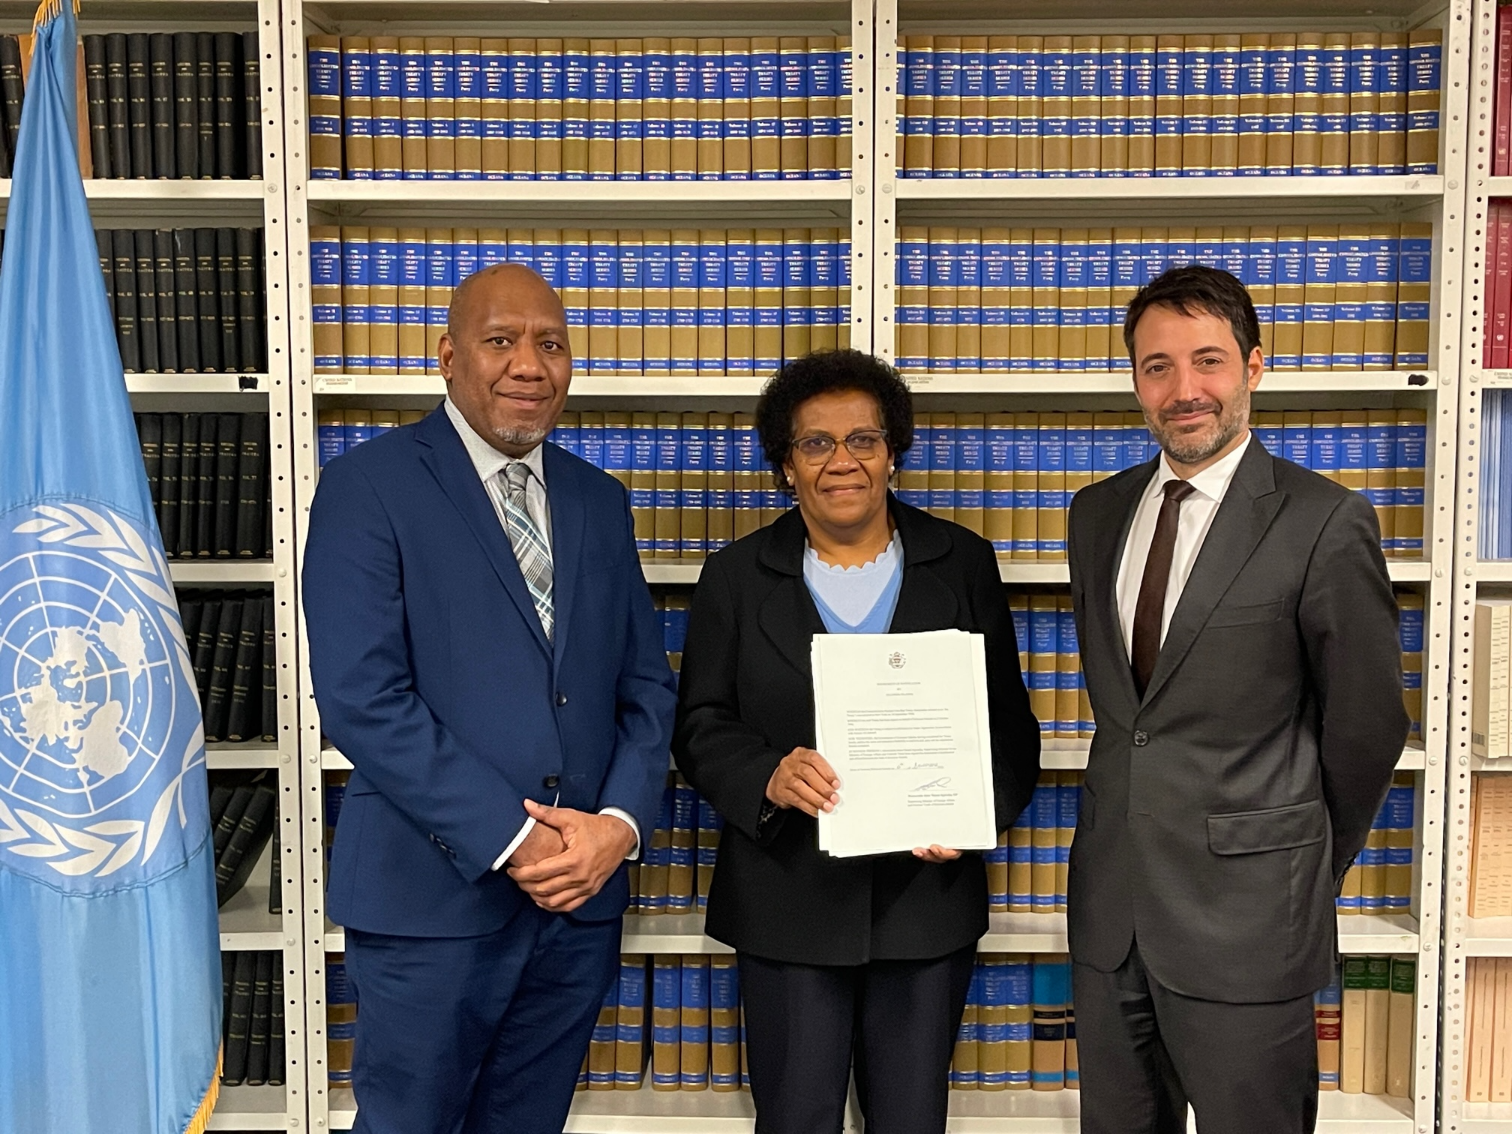  Solomon Islands Ratifies the Optional Protocol to the Convention on the Rights of the Child on the involvement of children in armed Conflict